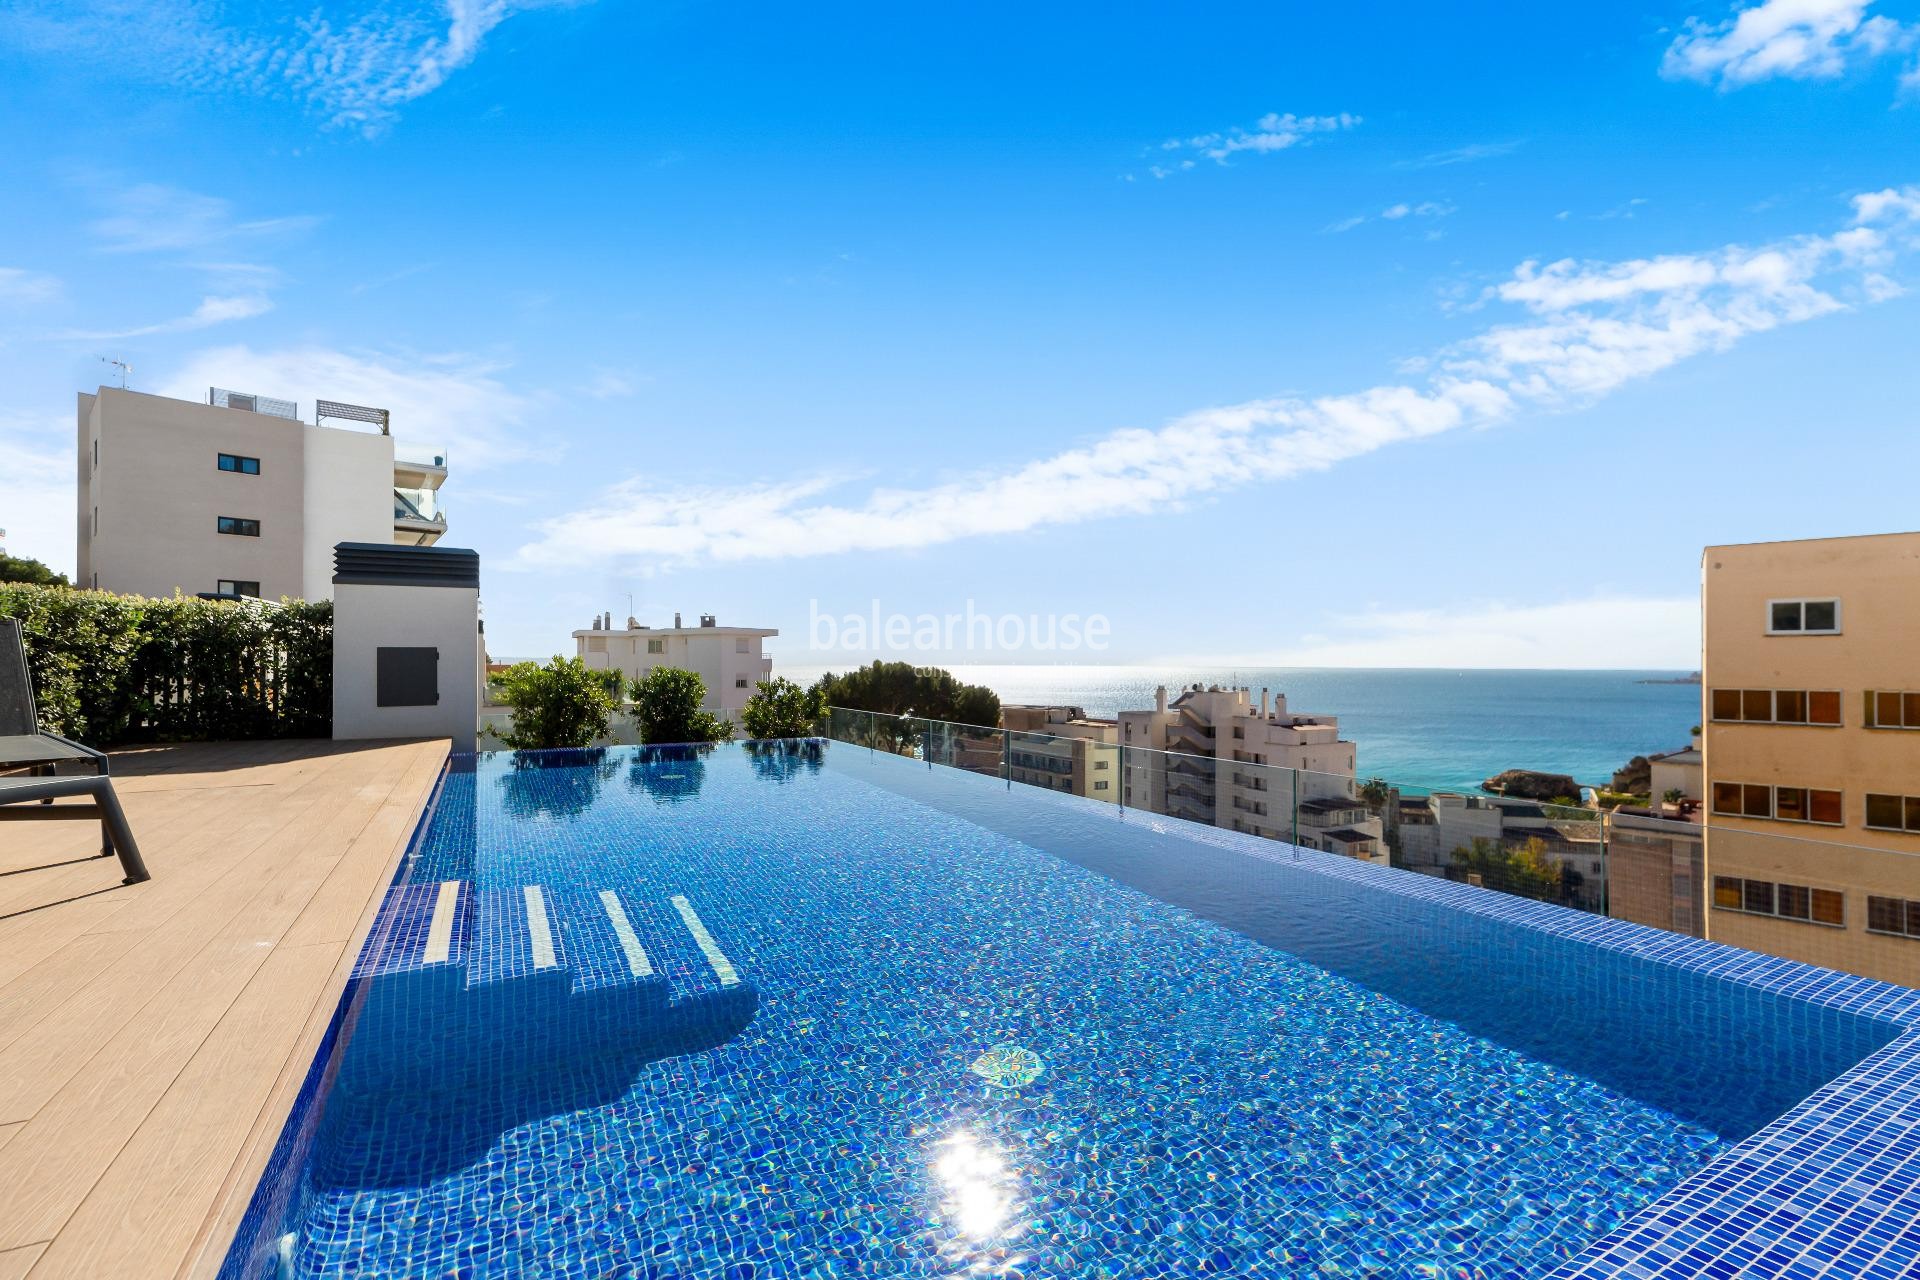 Spectacular new build penthouse with private pool and beautiful sea views near the beach